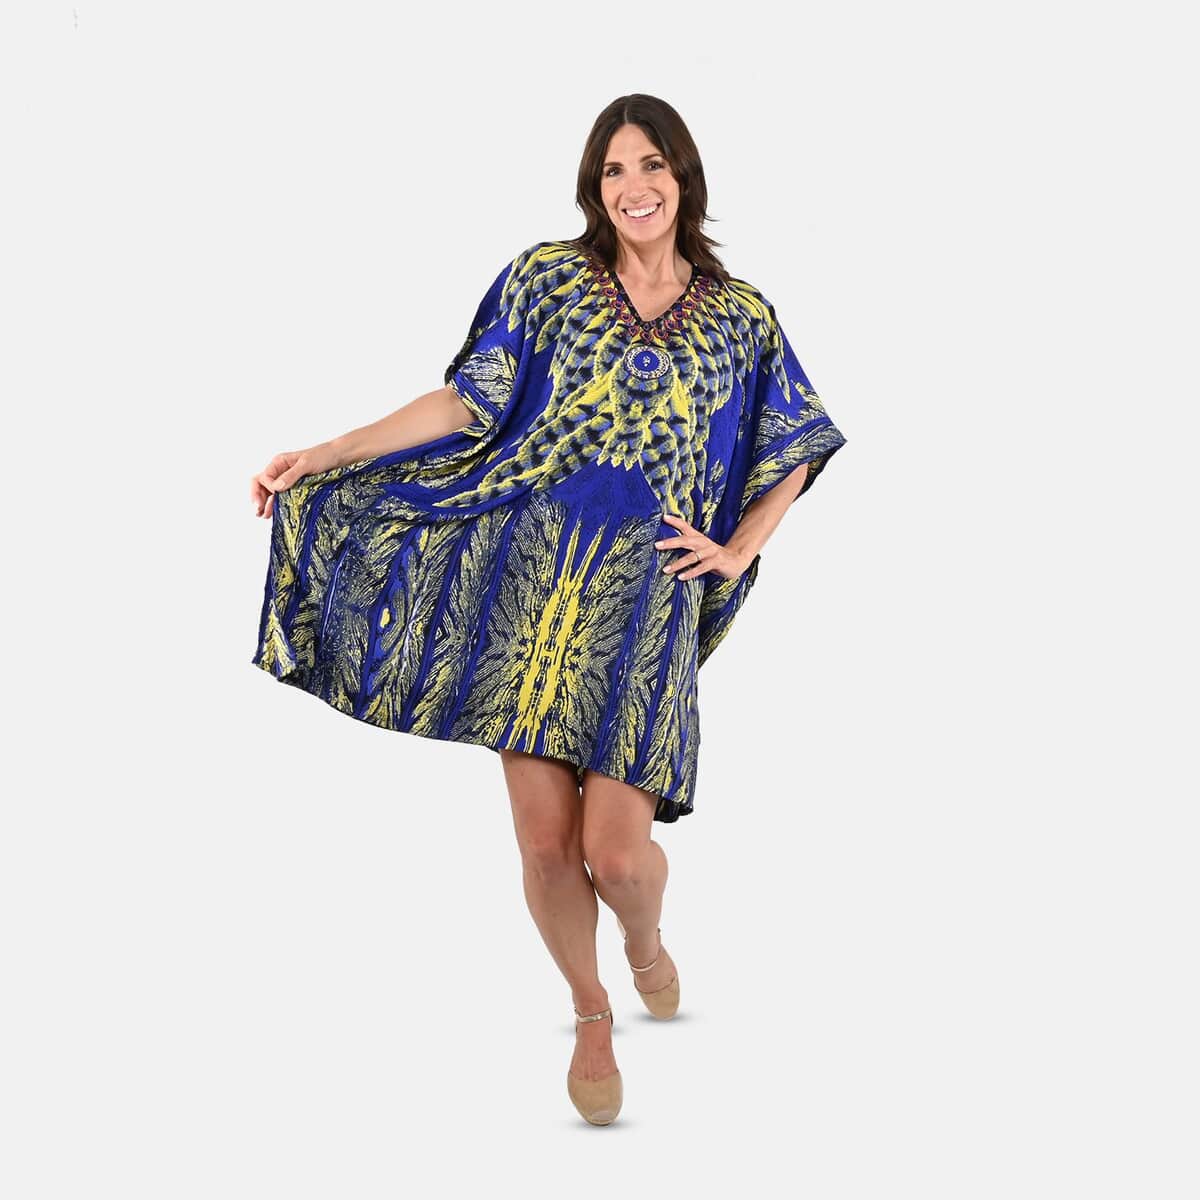 TAMSY Blue Feather Screen Printed Short Kaftan - One Size Fits Most (36"x41") image number 0